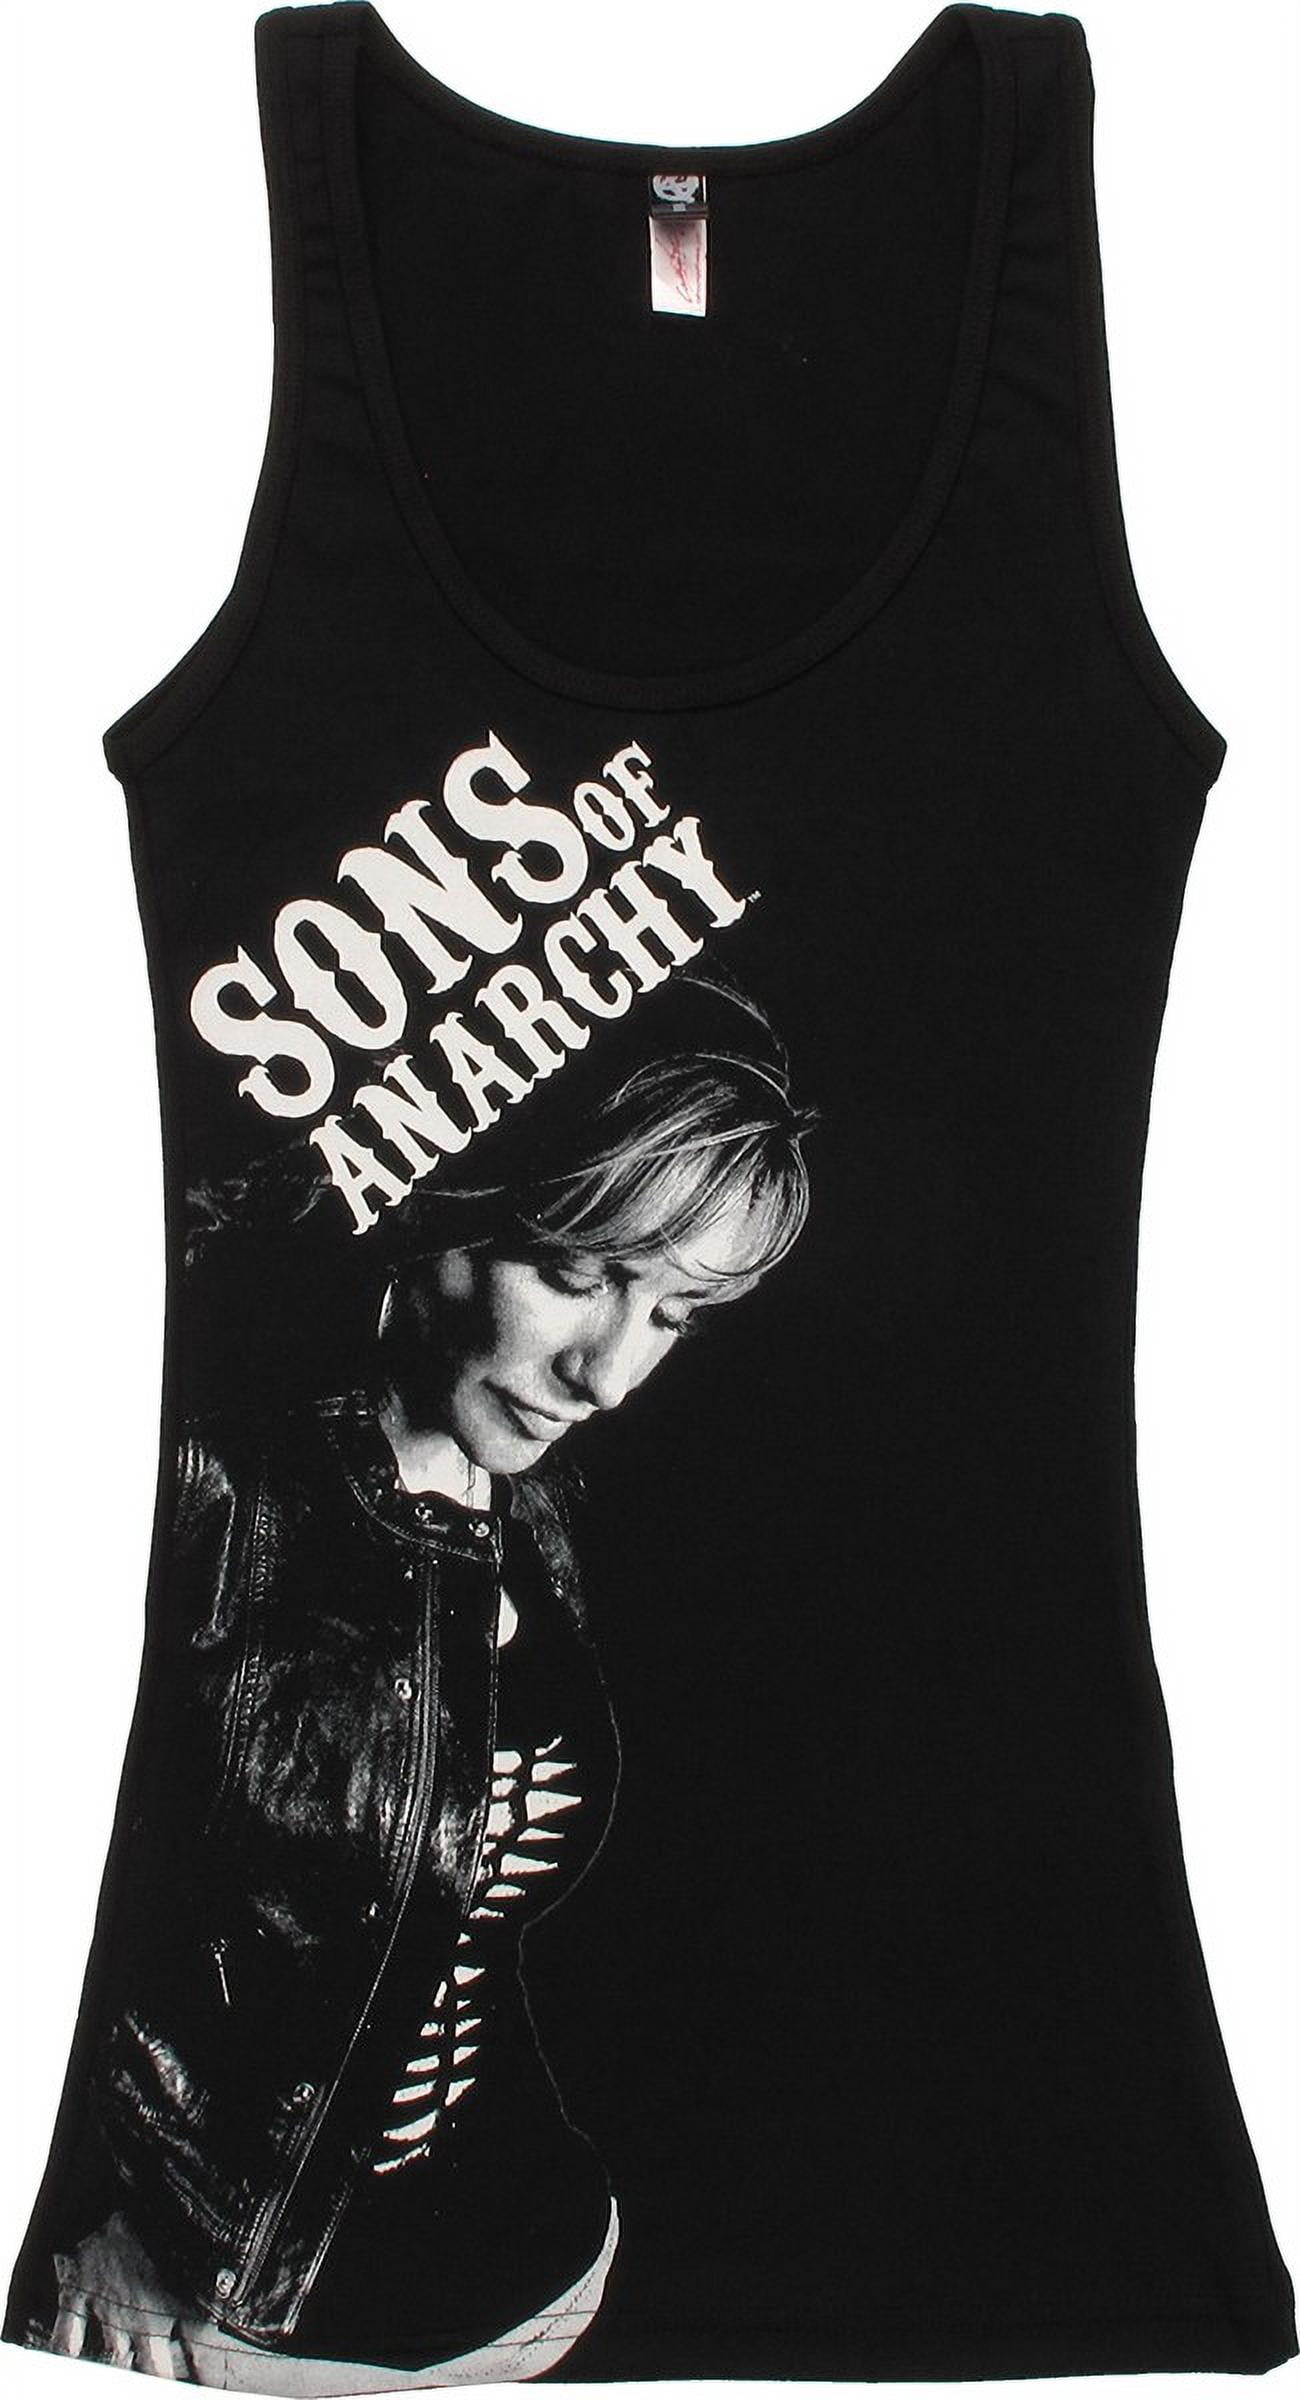 Sons Of Anarchy Rose Reaper Samcro Officially Licensed Junior Tank Top Shirt L 